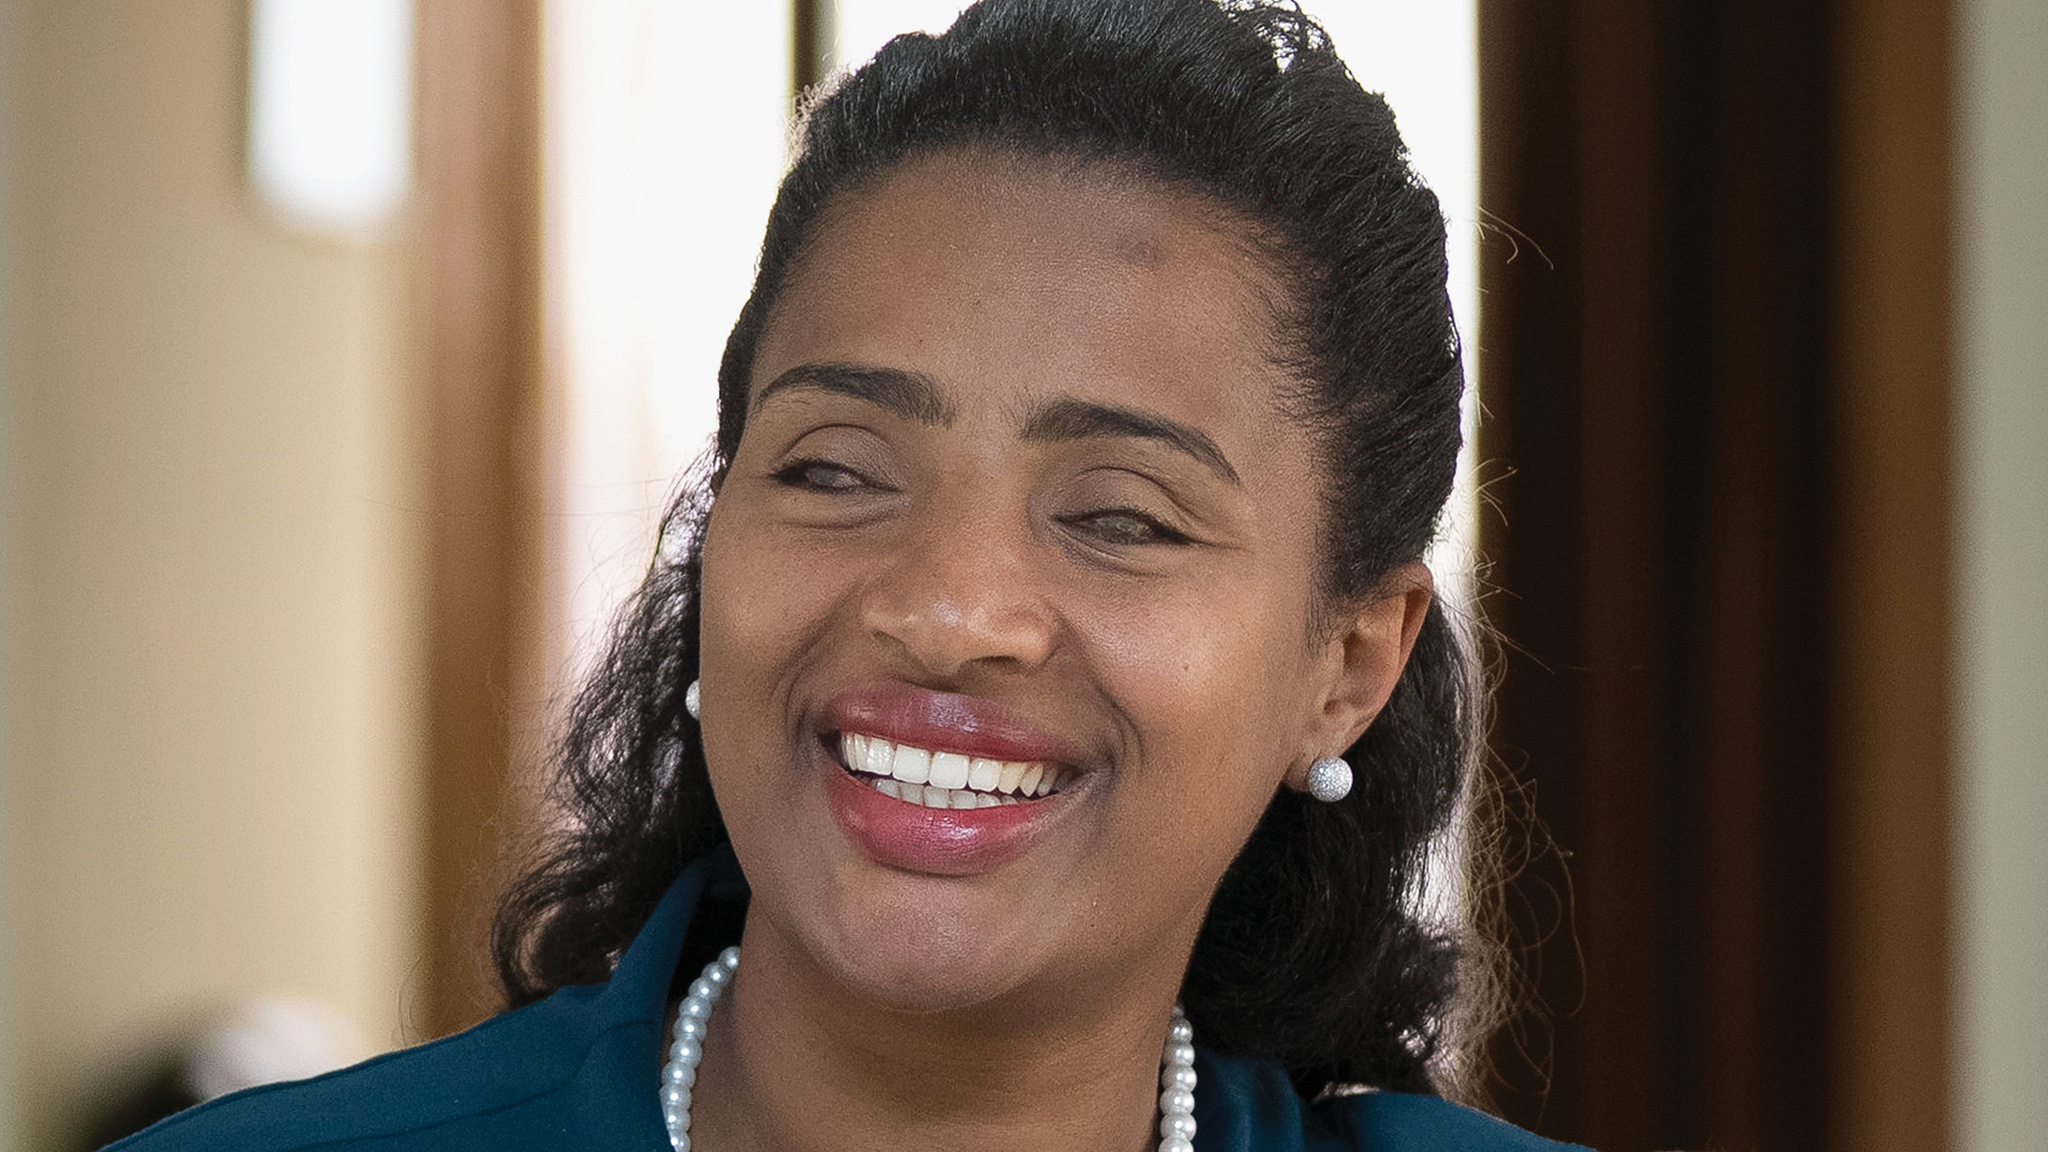 Yetnebersh Nigussie, a blind lawyer, reacts at her office in Addis Ababa, on October 11, 2017. Blind Ethiopian activist Yetnebersh Nigussie, who won Right Livelihood Award for her work promoting the rights of people with disabilities, fights for equal rights for the disabled, AFP reports October 25, 2017. / AFP PHOTO / Zacharias ABUBEKER        (Photo credit should read ZACHARIAS ABUBEKER/AFP/Getty Images)